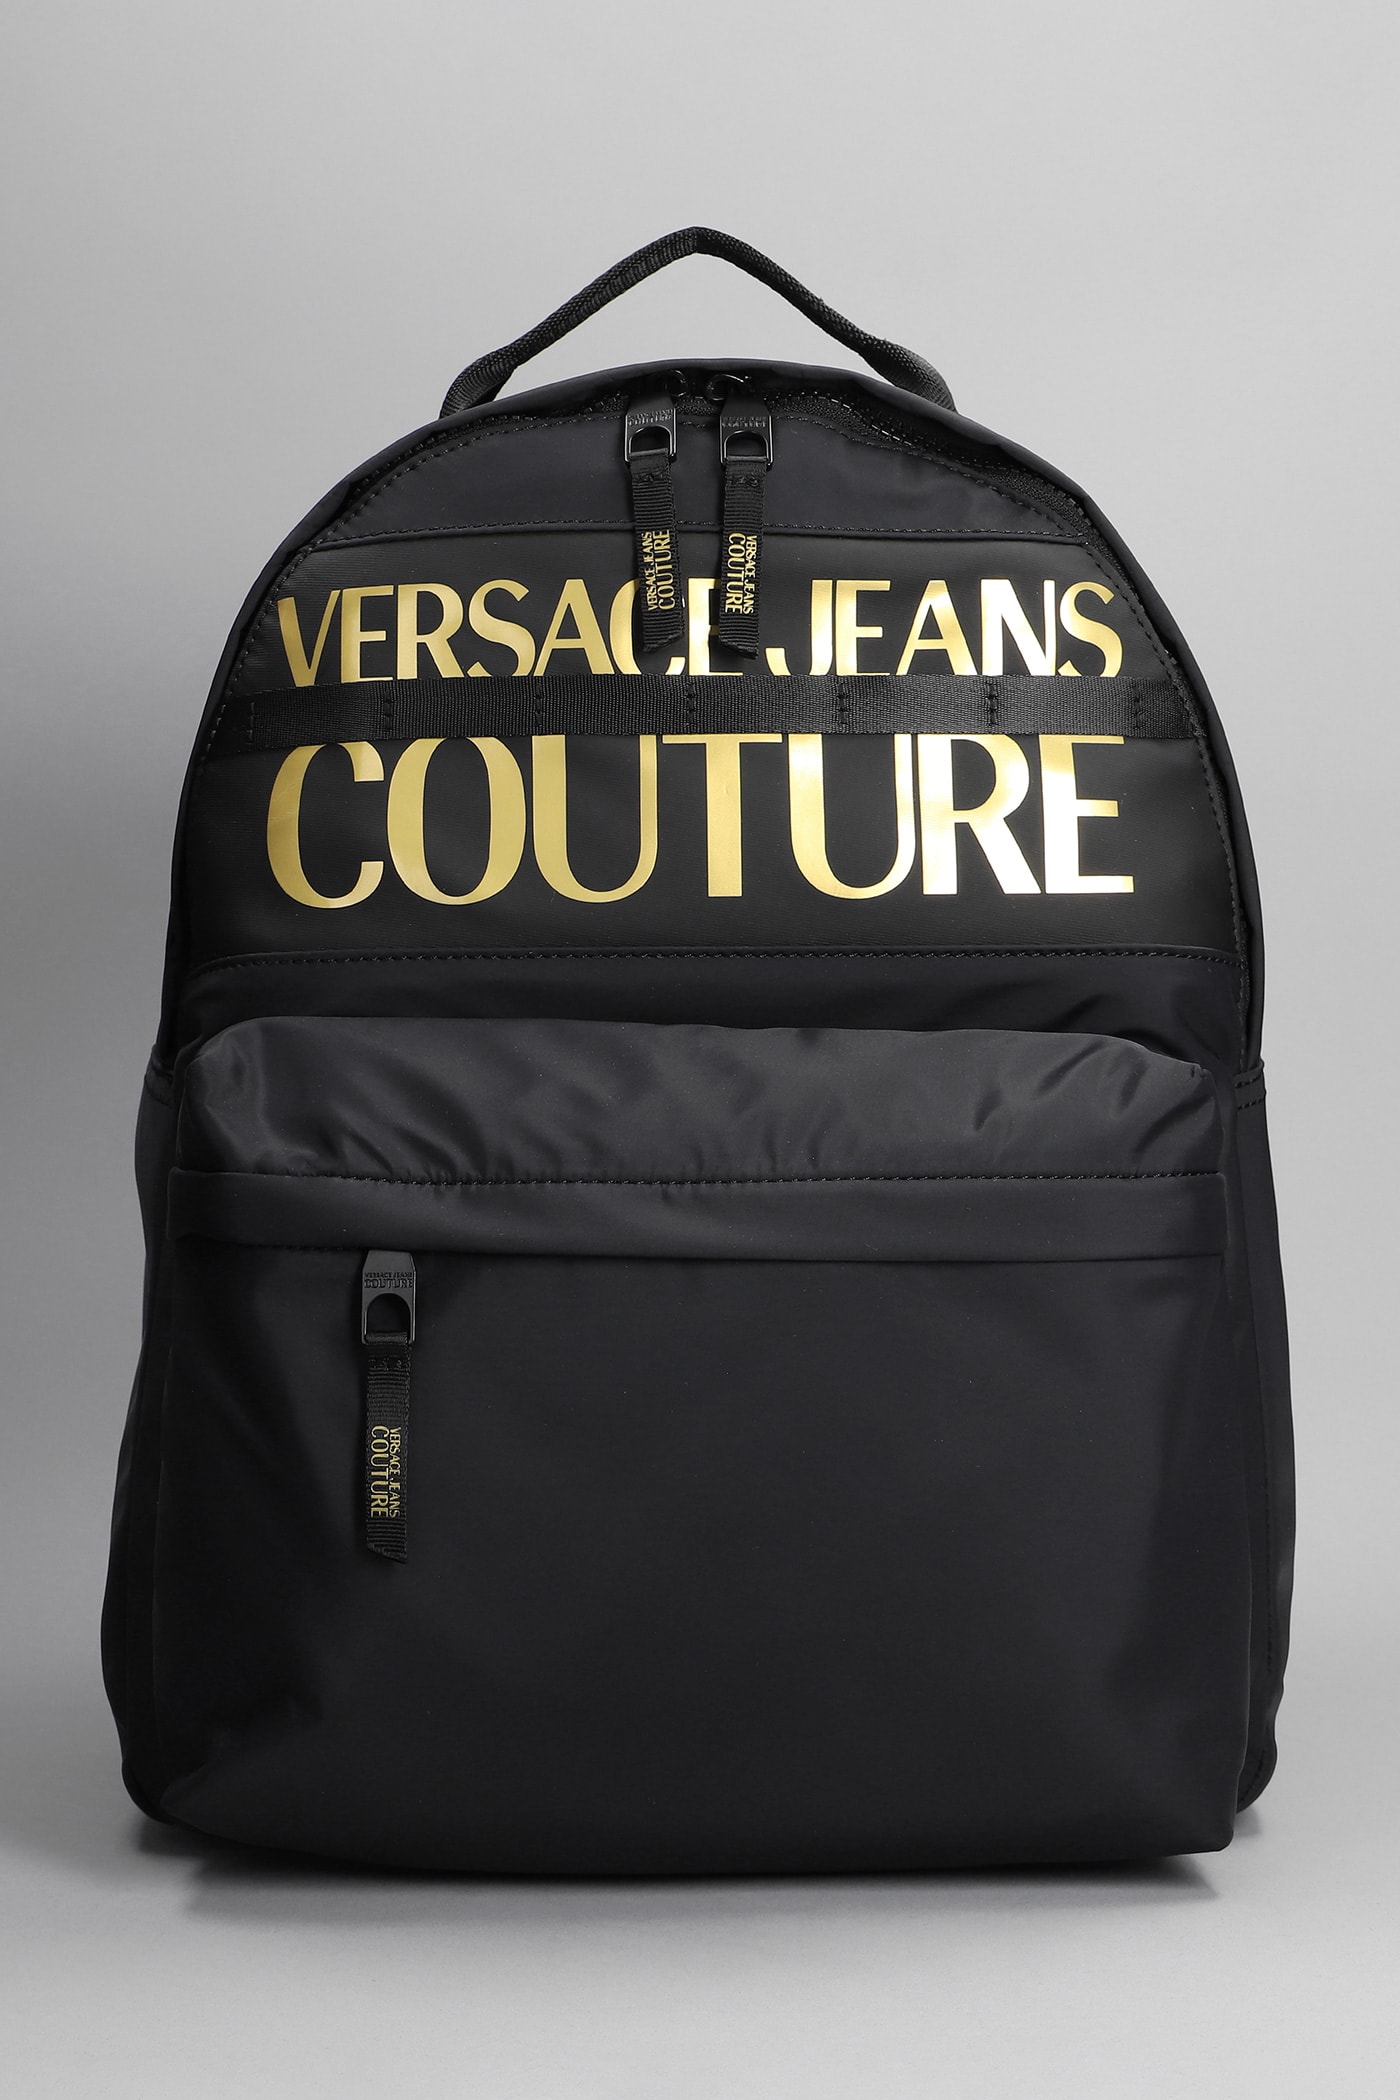 Versace Jeans Couture Backpack In Black Nylon